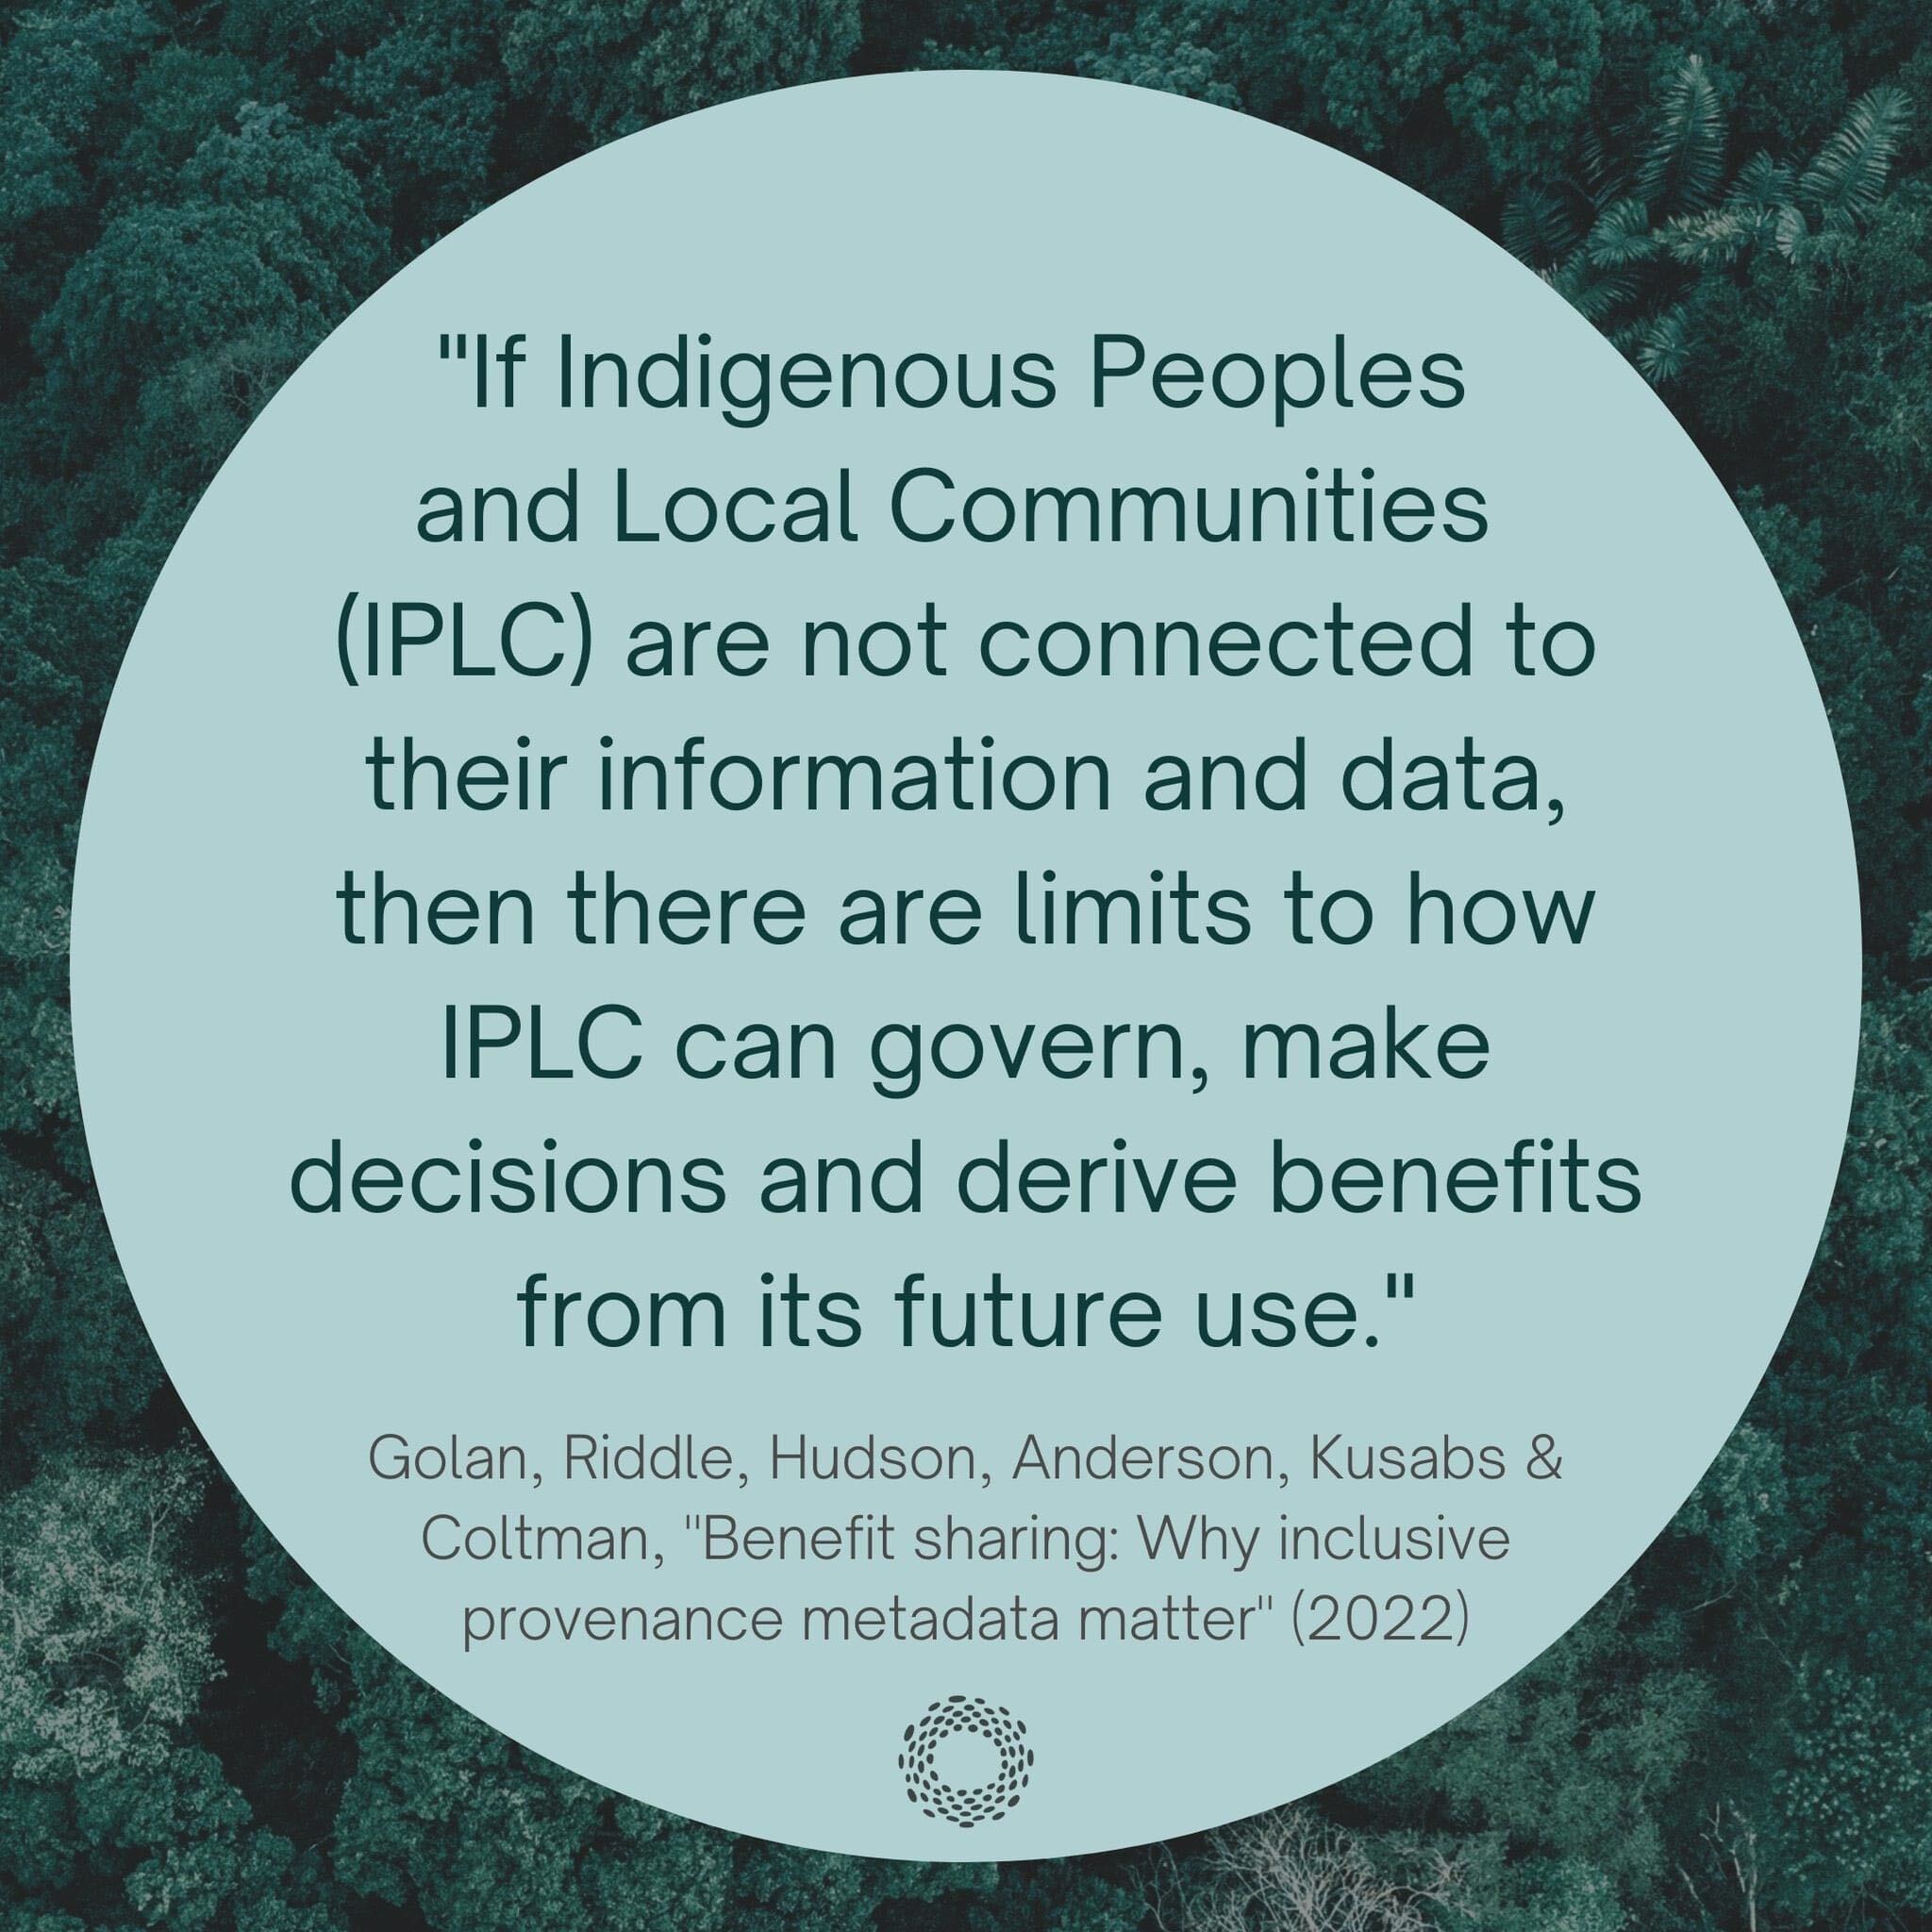 Black text on a decorative blue-green background: “If Indigenous Peoples and Local Communities (IPLC) are not connected to their information and data, then there are limits to how IPLC can govern, make decisions and derive benefits from its future use. Golan, Riddle, Hudson, Anderson, Kusabs & Coltman, Benefit sharing: Why inclusive provenance metadata matter (2022).”